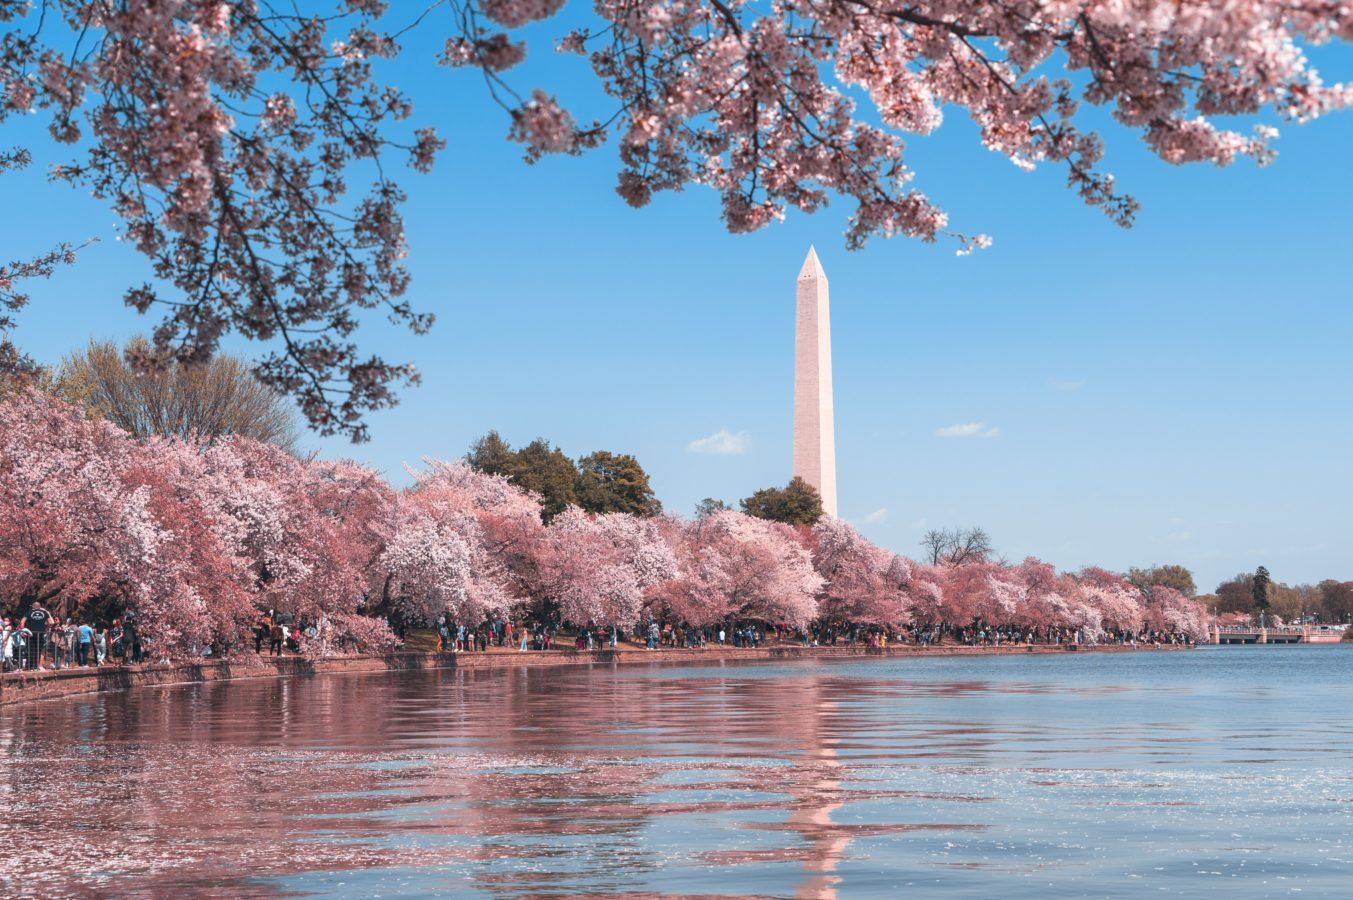 7 places around the world for the most beautiful cherry blossoms — besides Japan